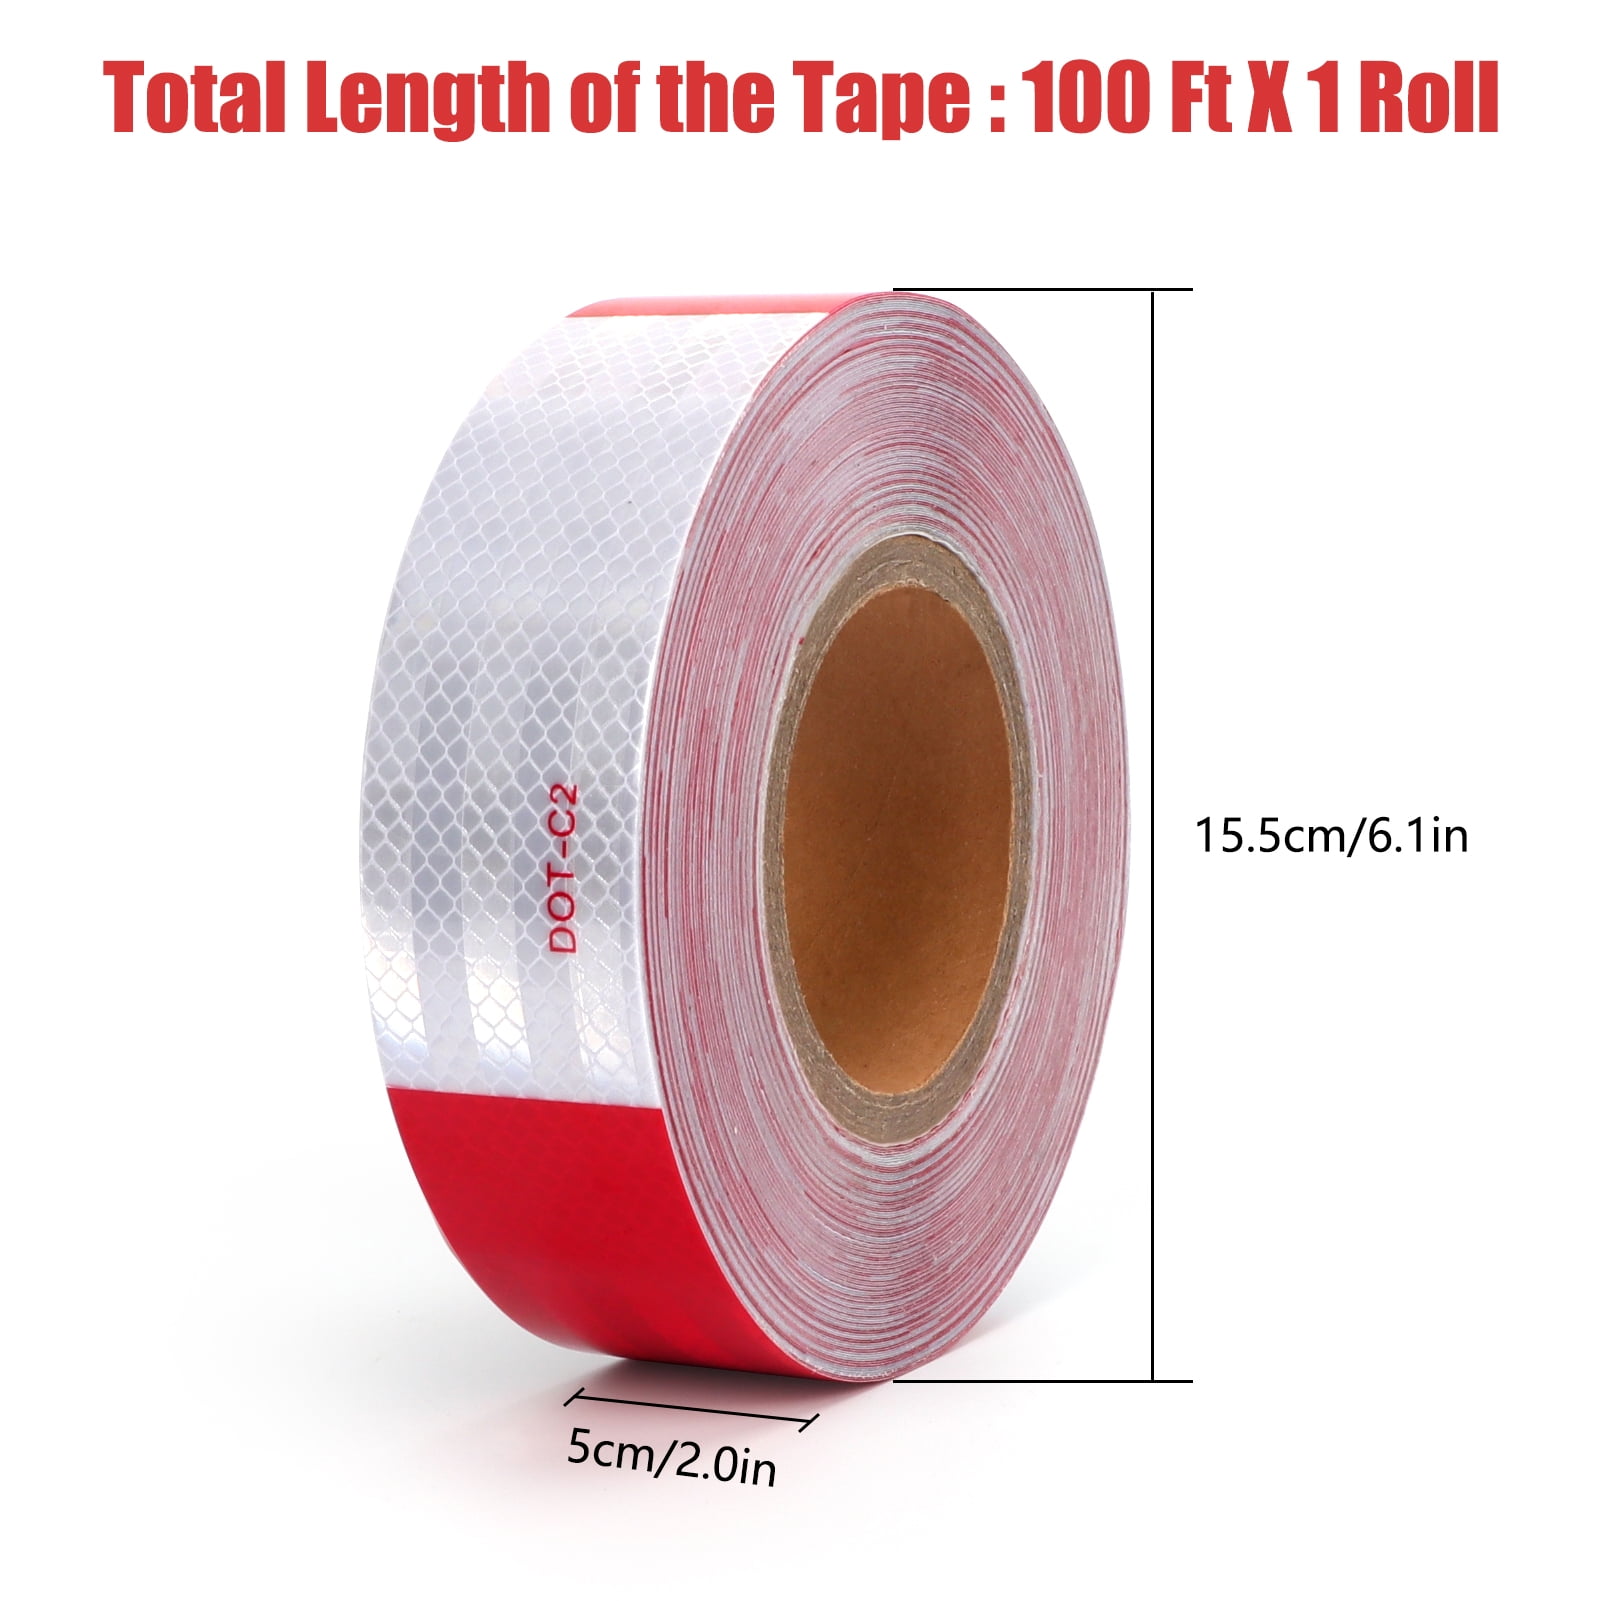 WAENLIR 2 inch x 160Feet Reflective Safety Tape DOT-C2 Waterproof Red and White Adhesive Conspicuity Tape for Trailer, Outdoor, Cars, Trucks